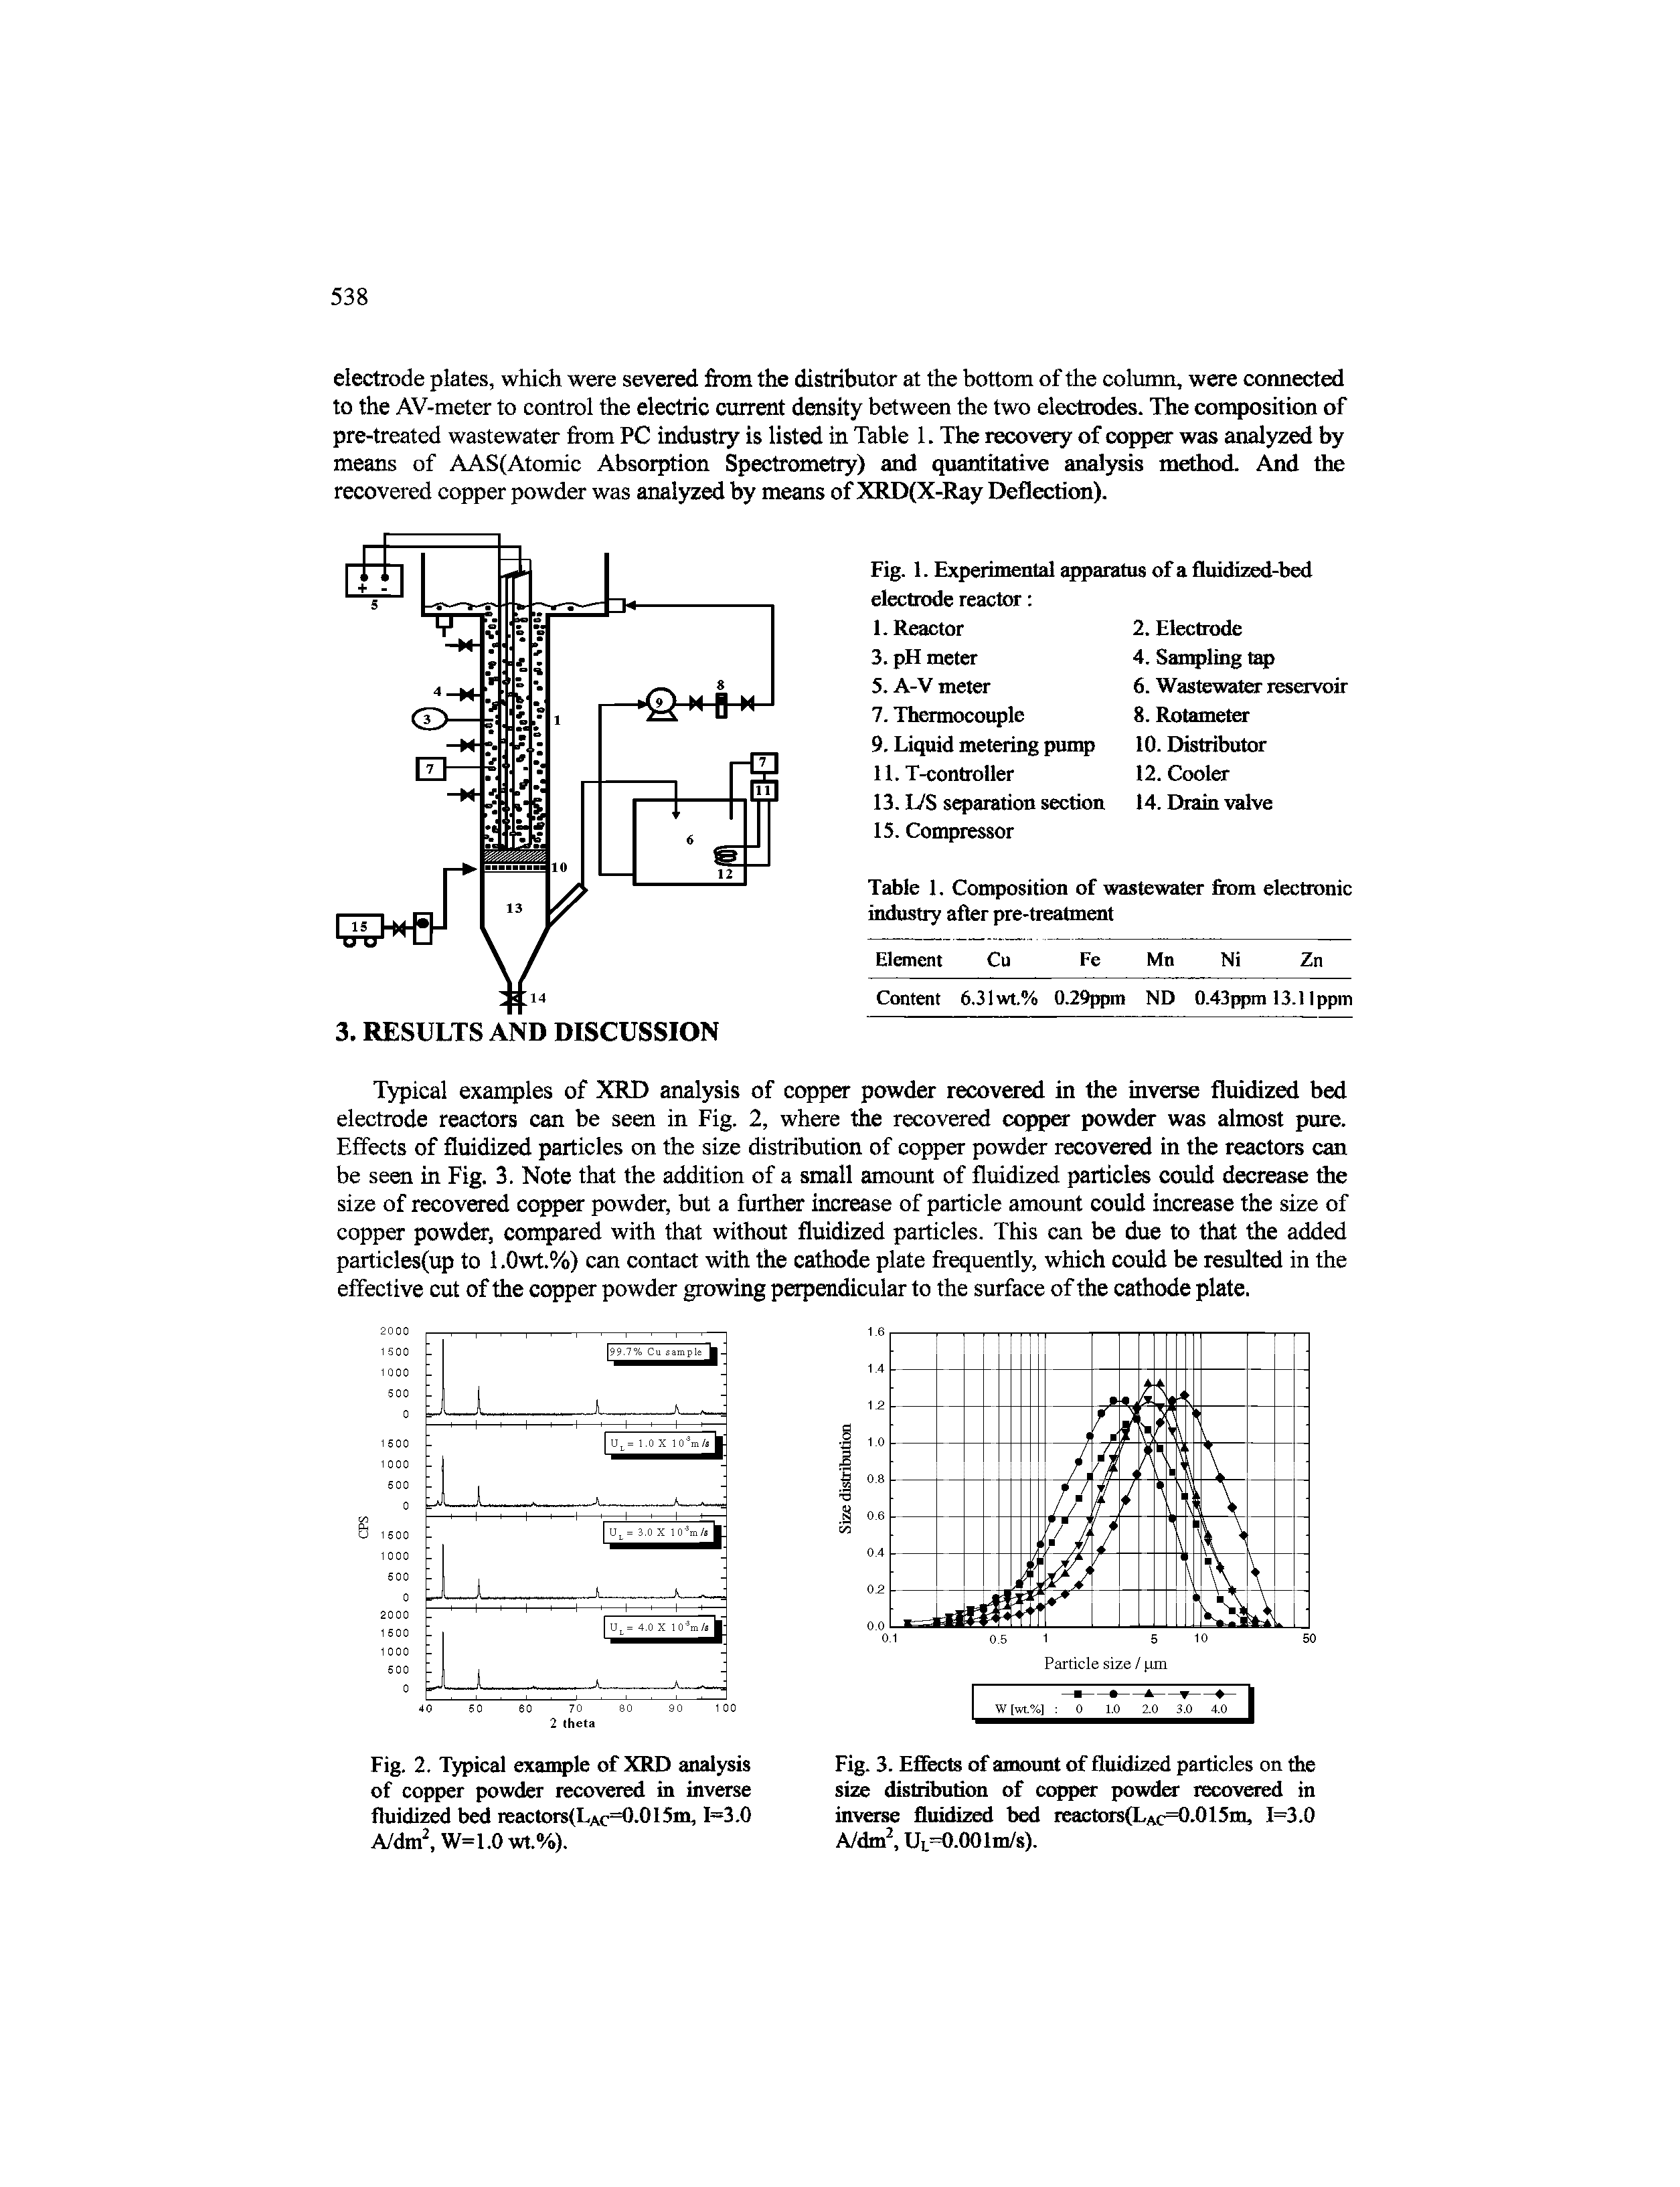 Fig. 2. Typical example of XRD analysis of copper powder recovered in inverse fluidized bed reactors(LAc=0.015m, 1=3.0 A/dm W=1.0wt.%).